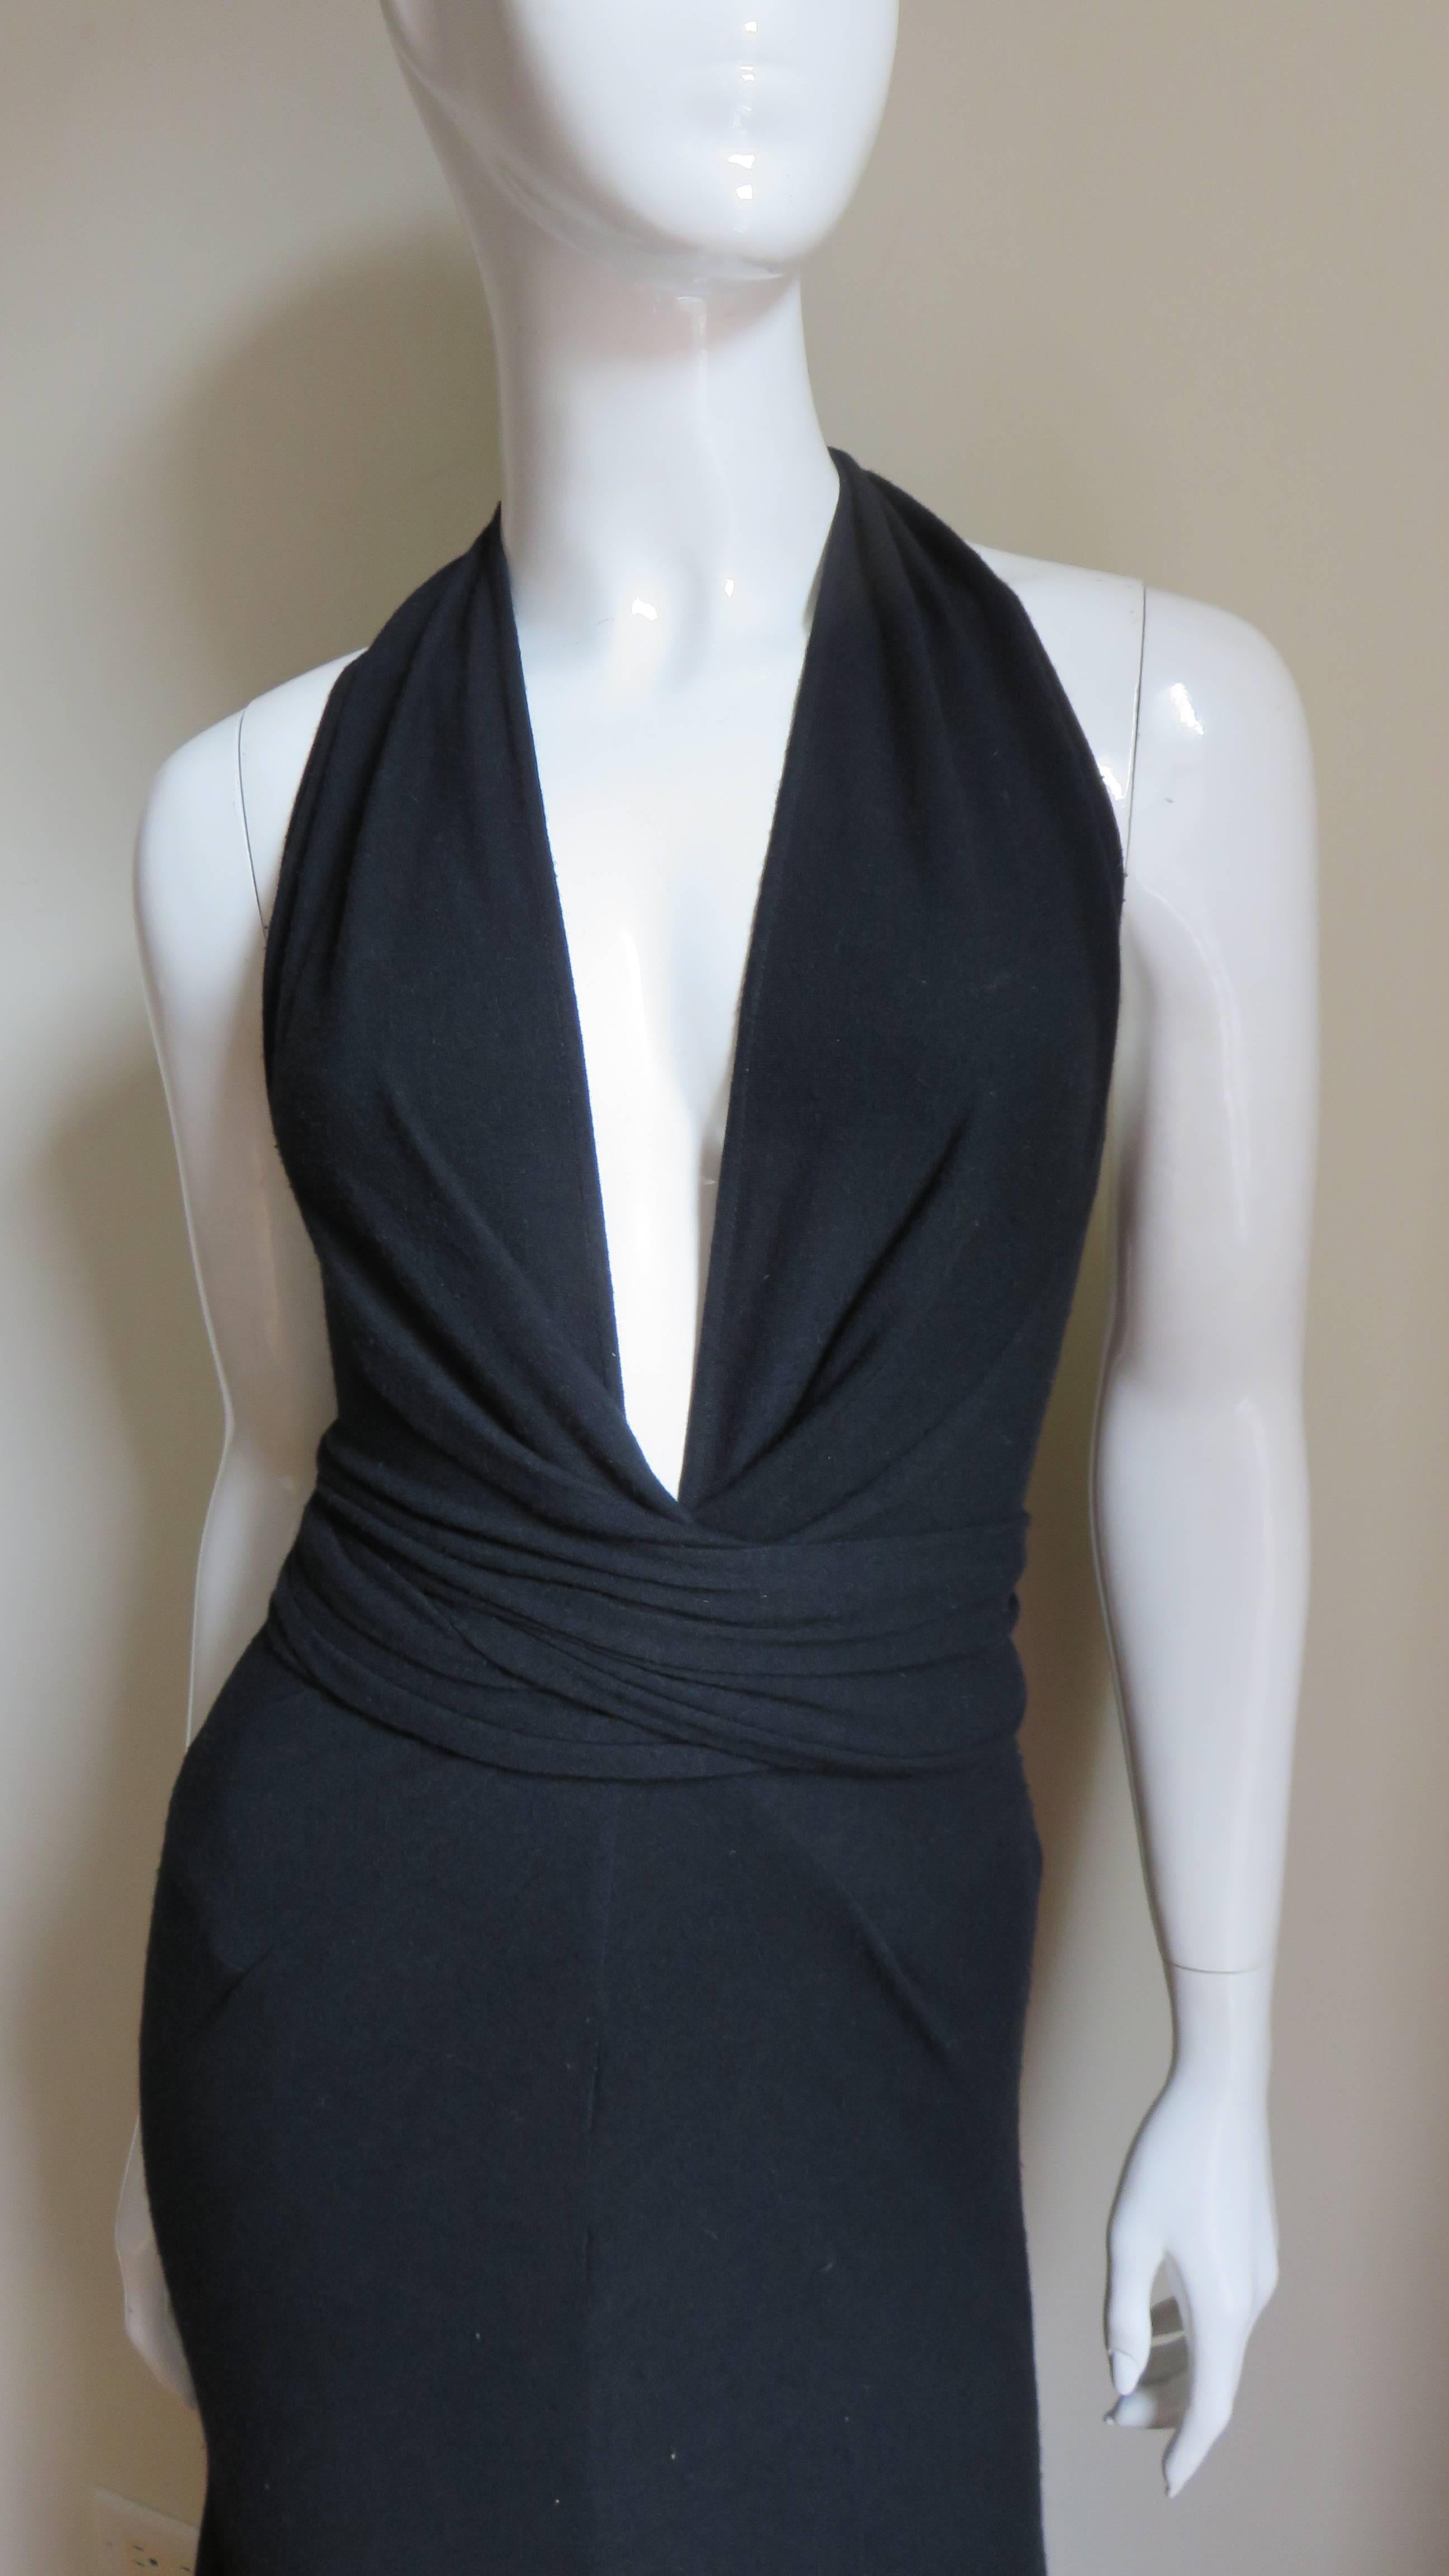 A fabulous black silk jersey maxi dress by Donna Karan.  It has a deep plunging neckline and ties that wrap around the waist.  The skirt portion hugs the hips then flares to the hem.  It is unlined and slips on without closures.  Excellent, unworn